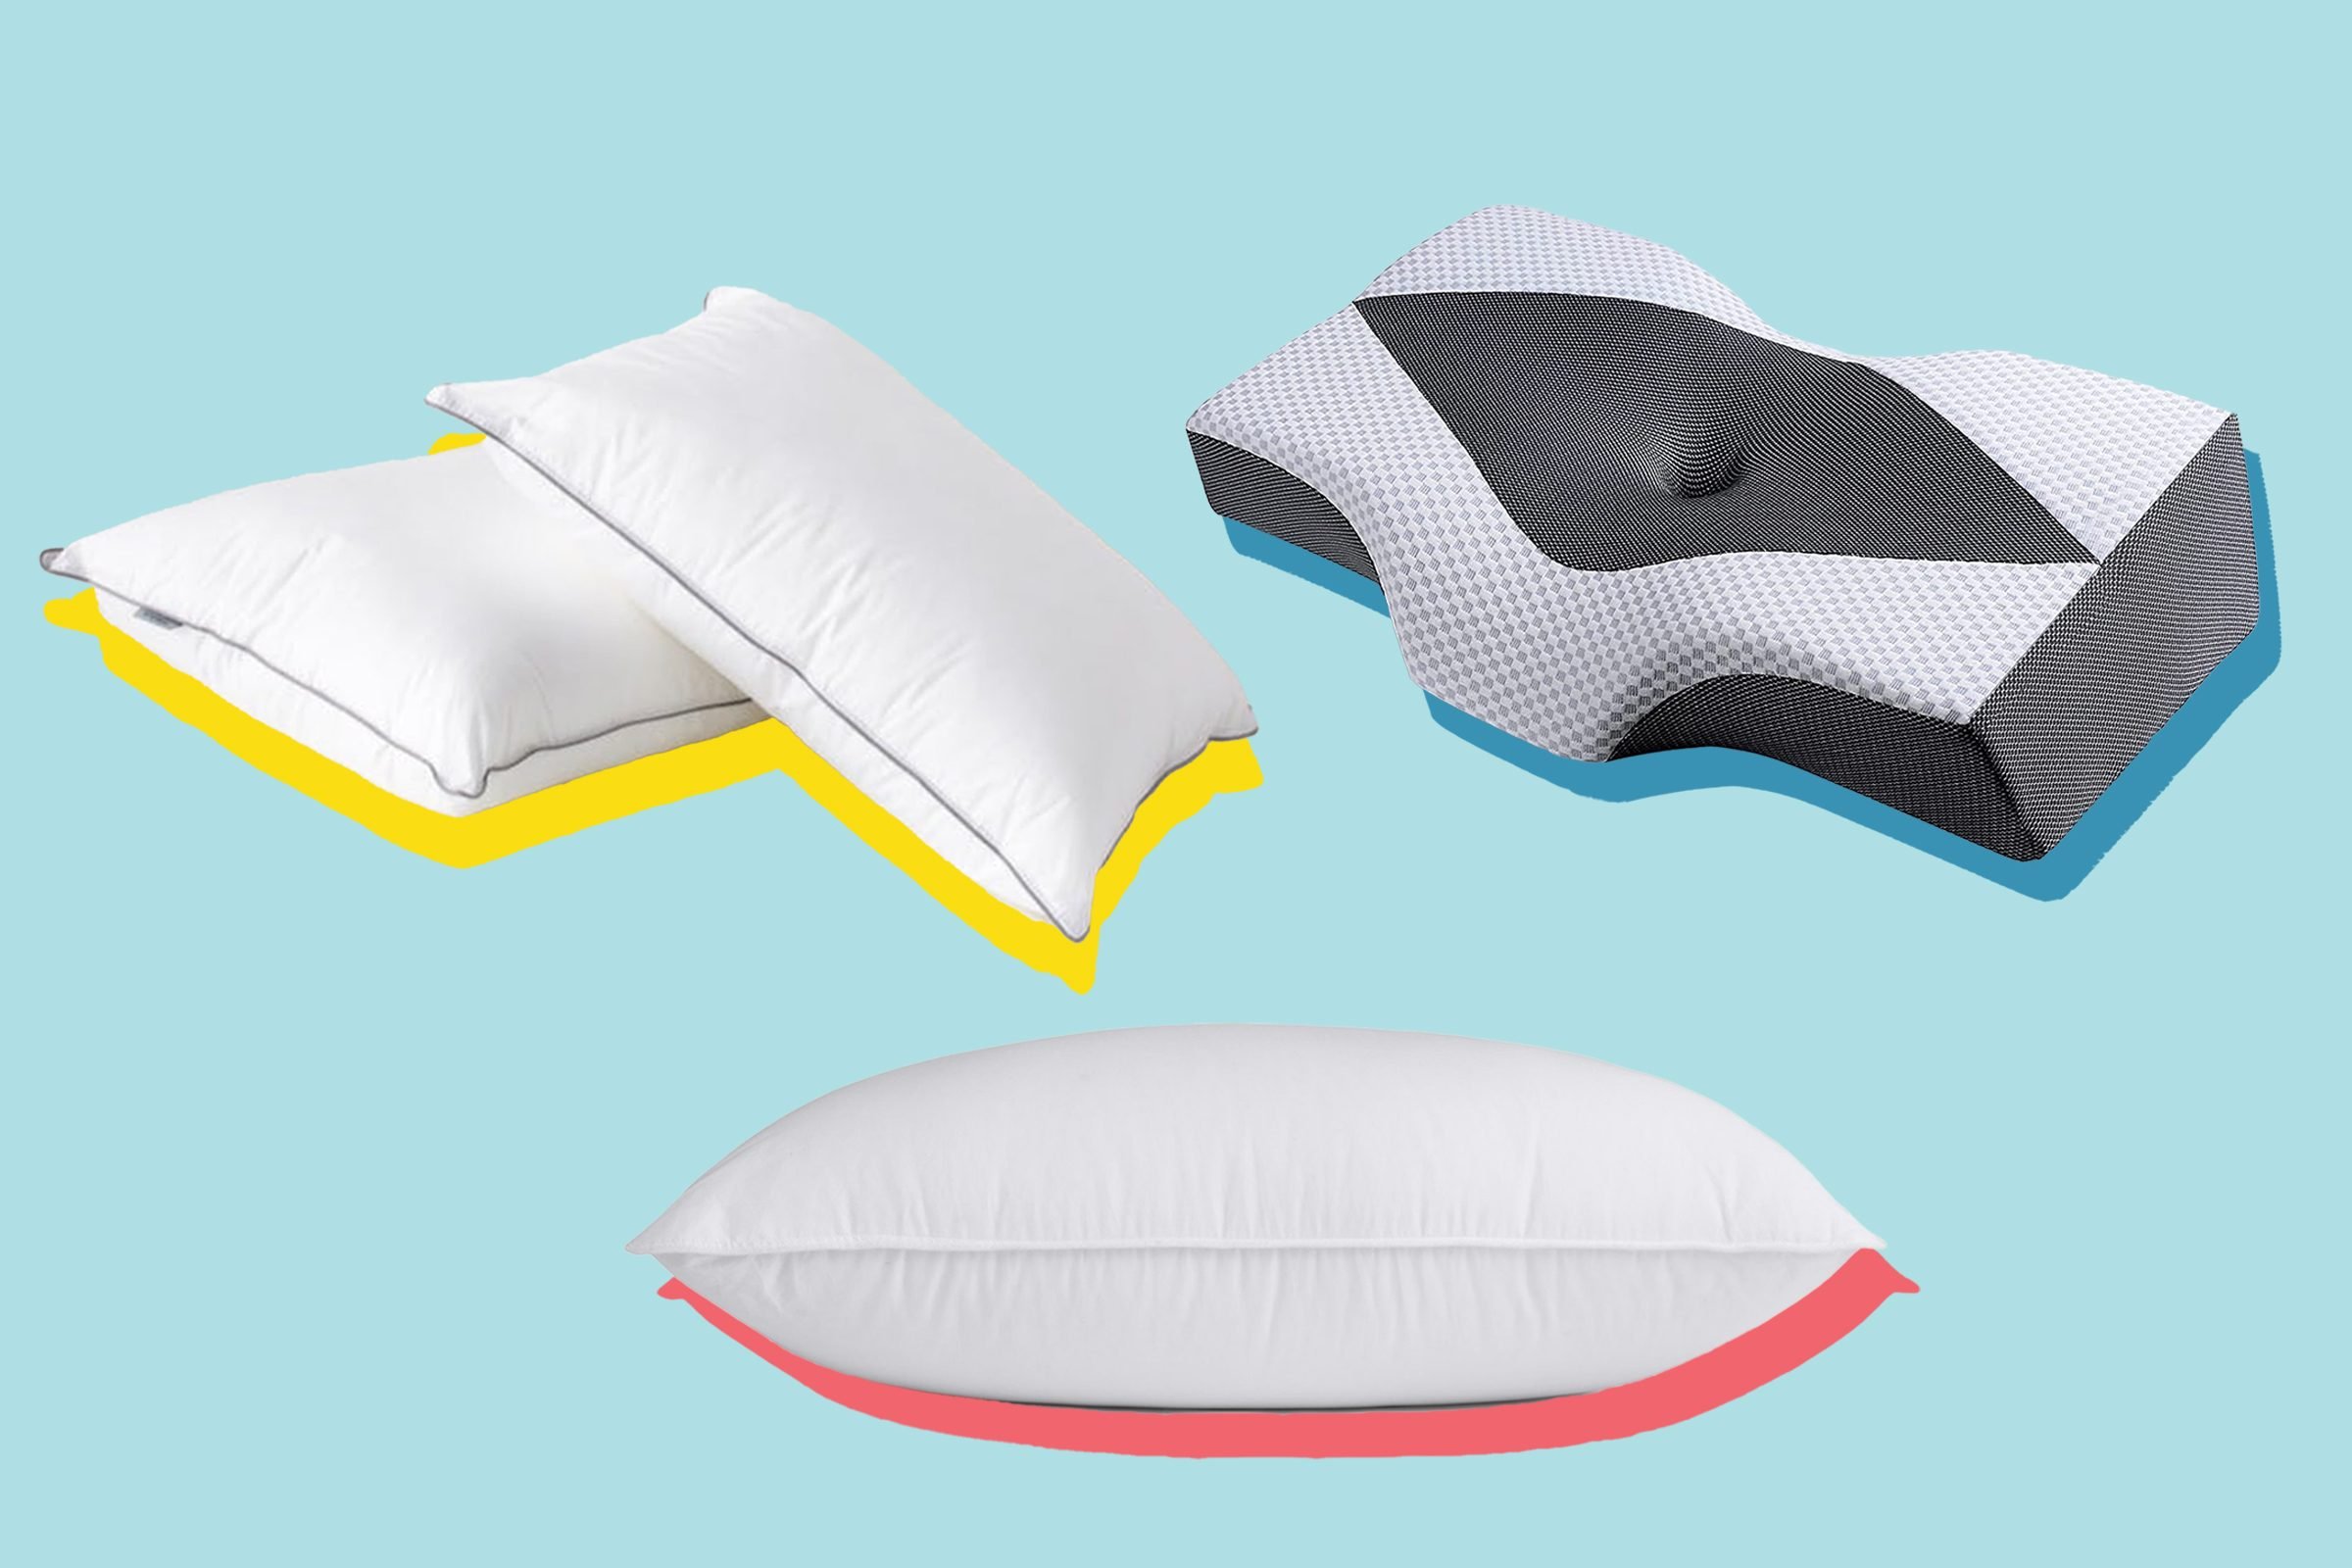 Leg Pillow for Back Pain, Eco Friendly, Medical Quality Memory